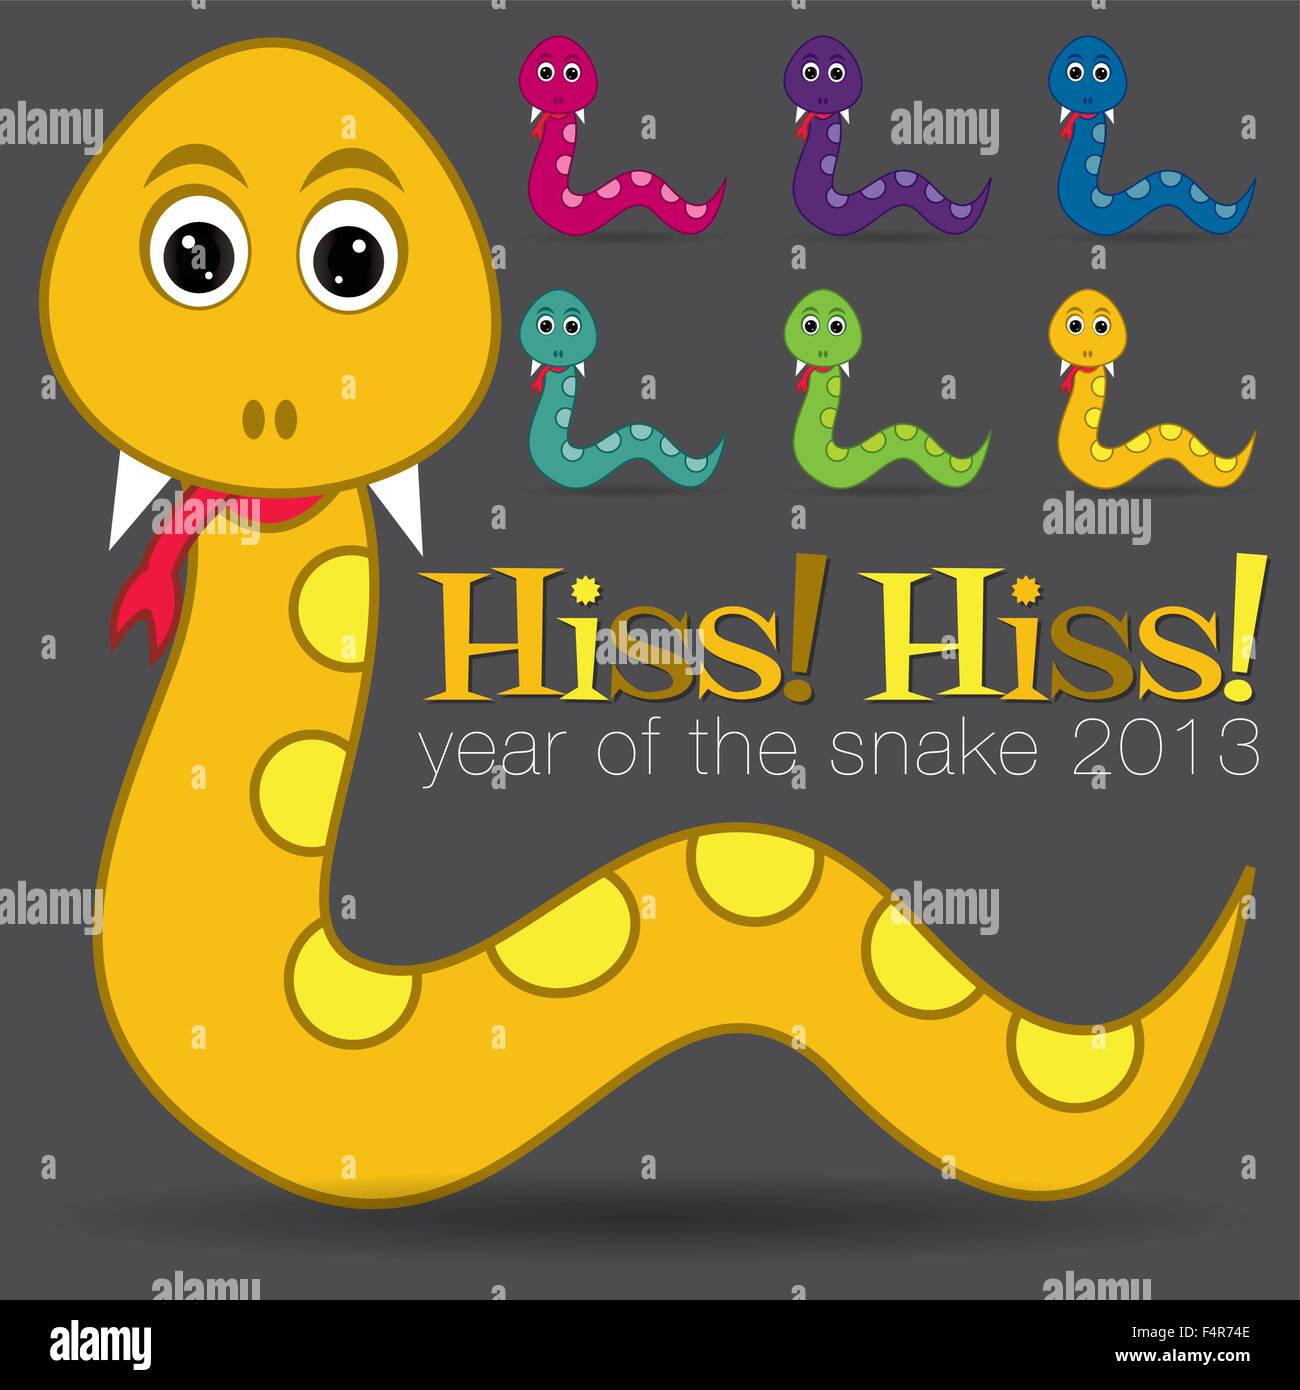 Chinese New Year Snake Characters In Vector Format Stock Vector Image